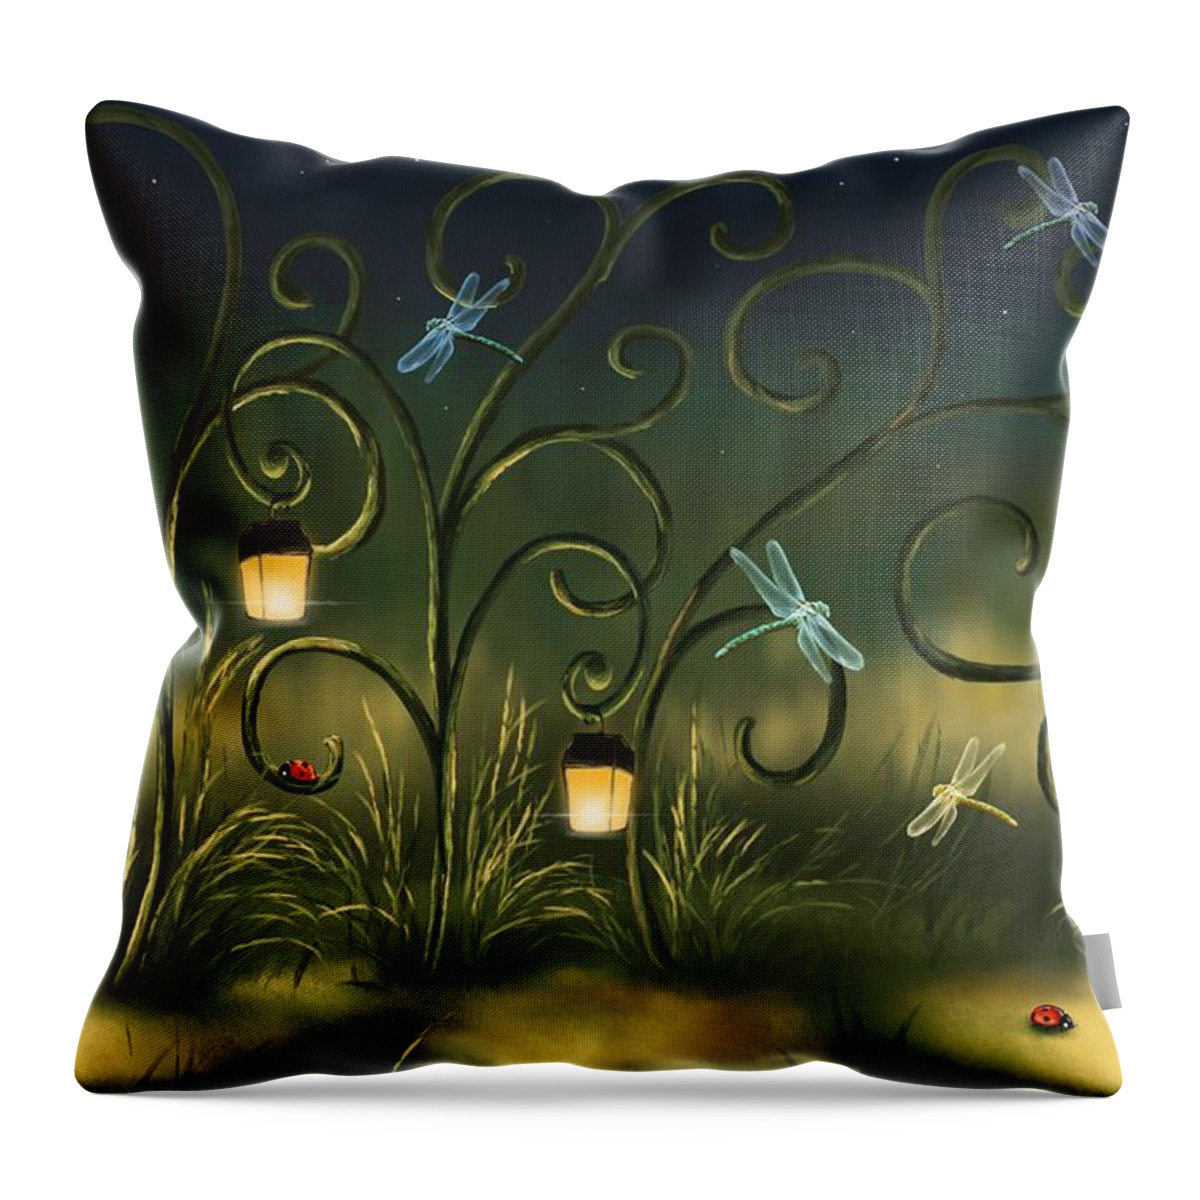 Village Throw Pillow featuring the painting Magical village by Veronica Minozzi